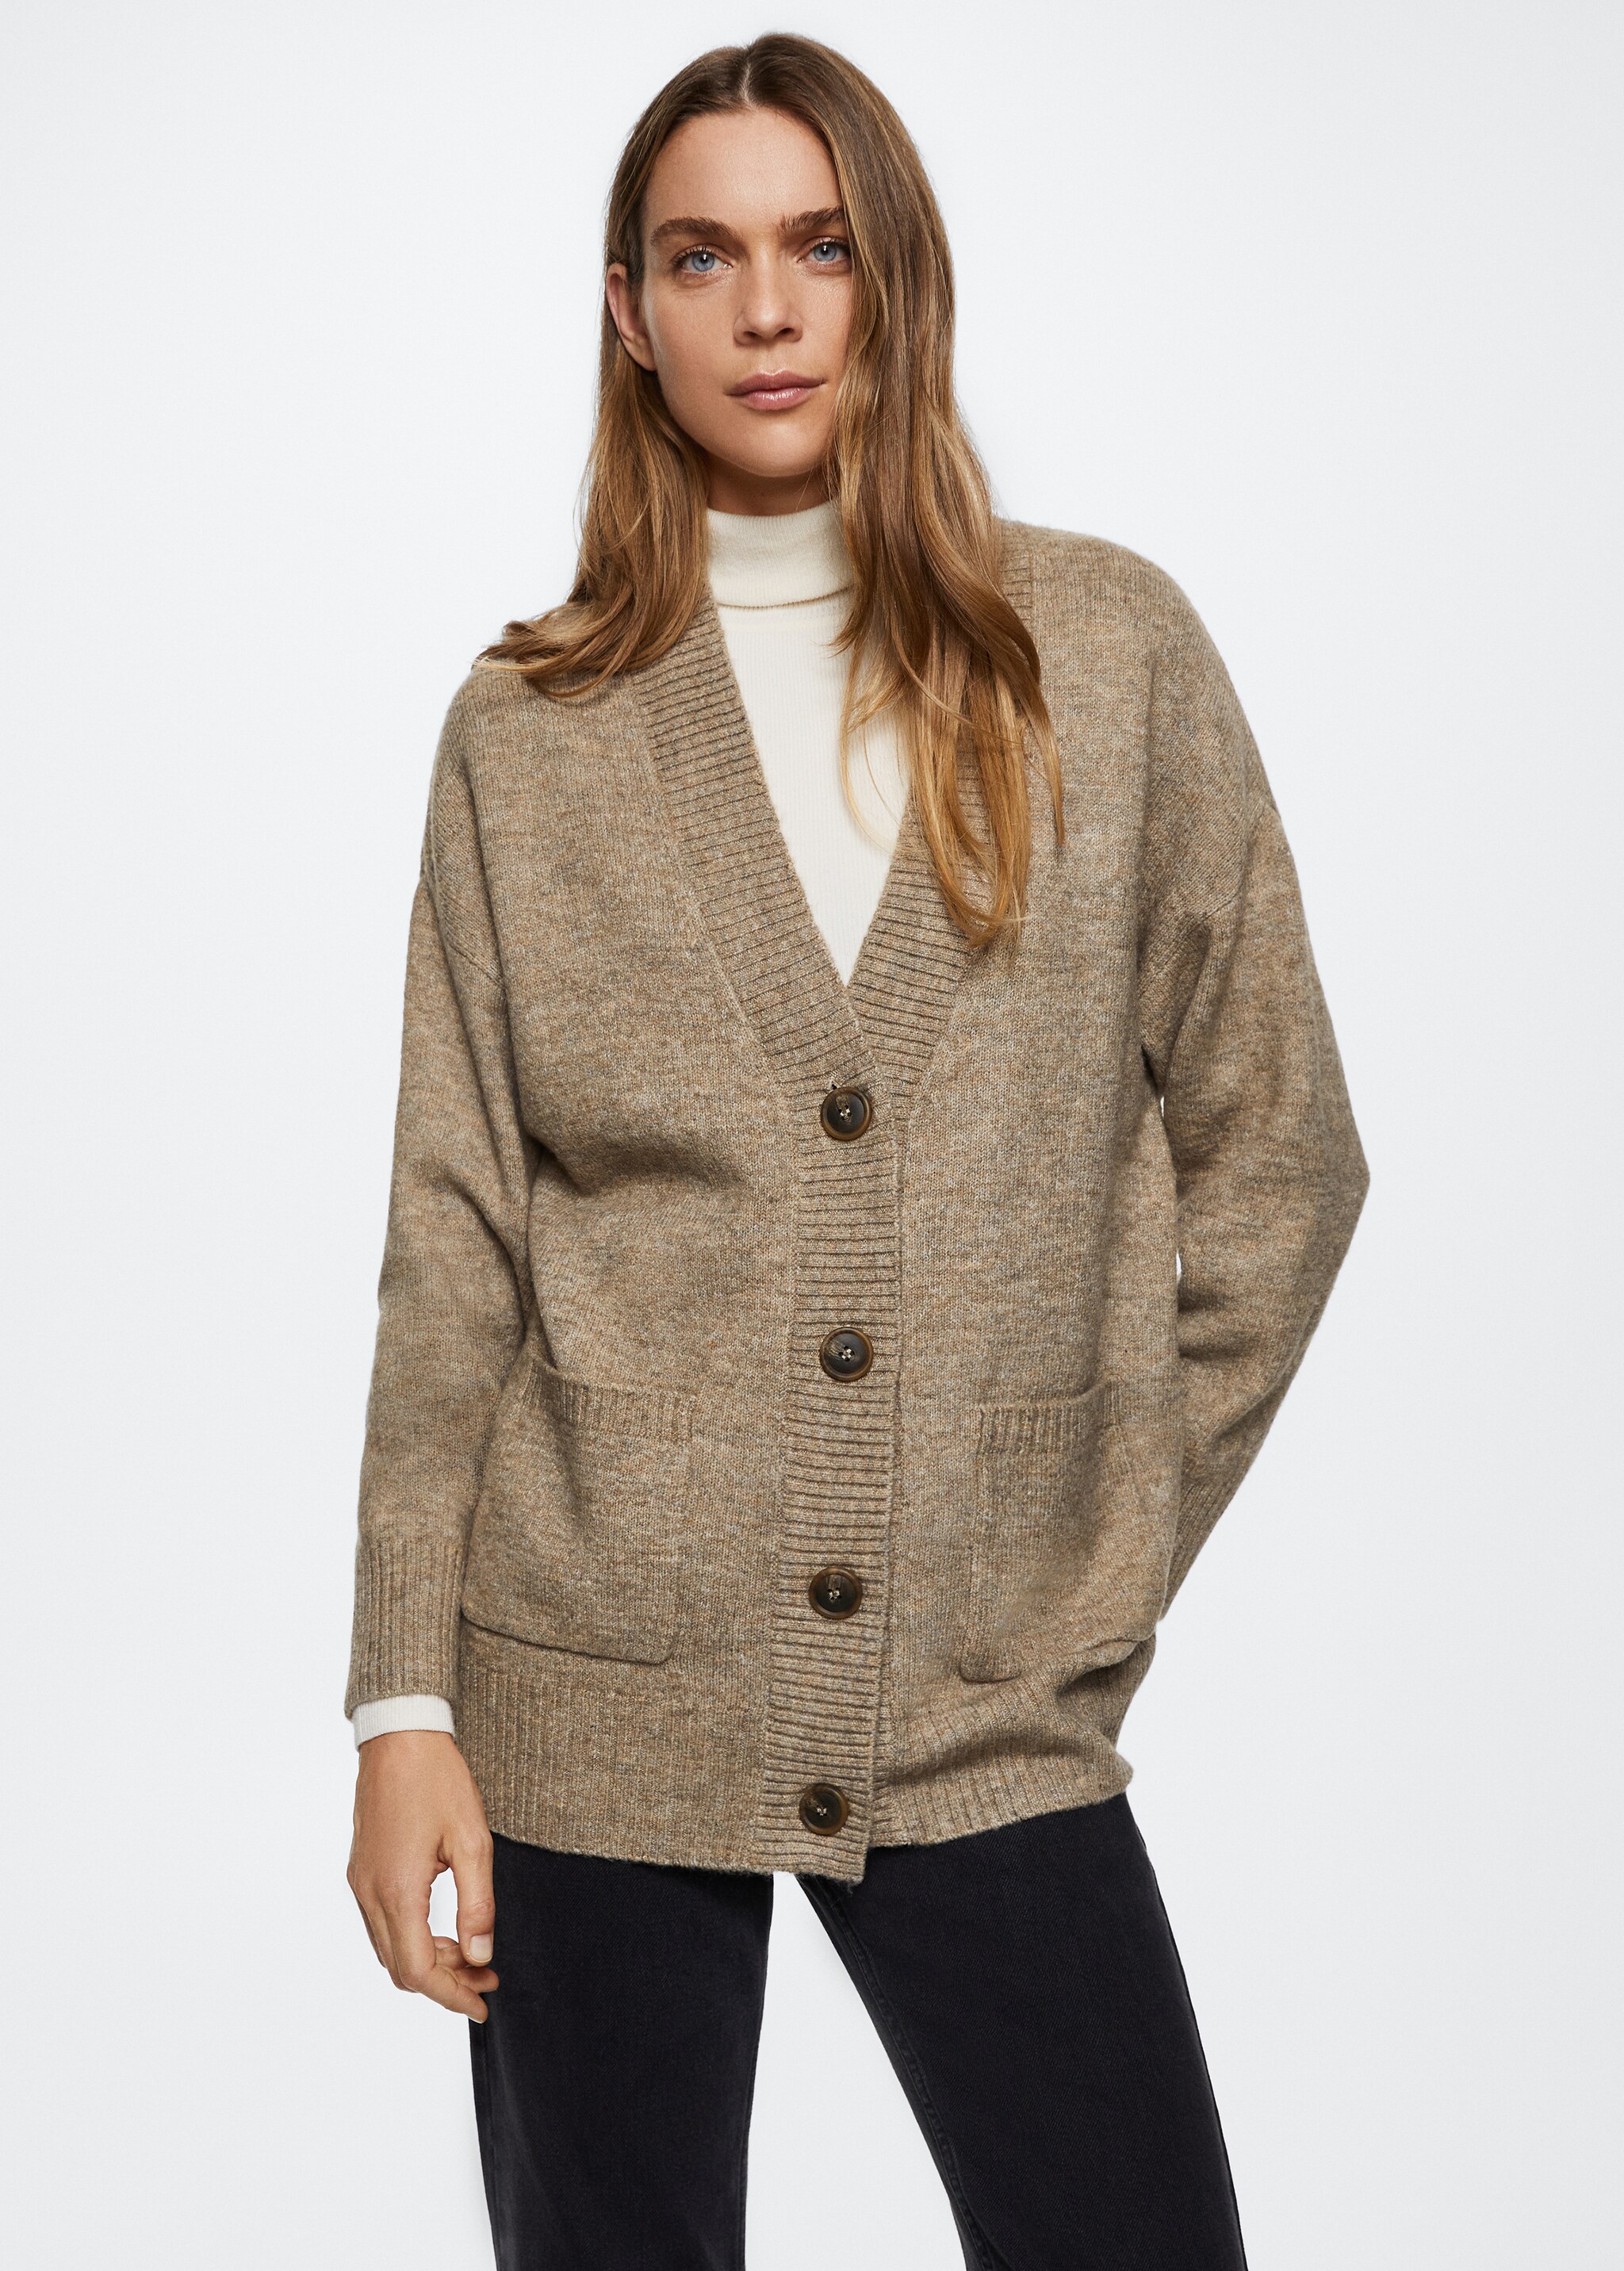 Oversized cardigan with buttons - Medium plane